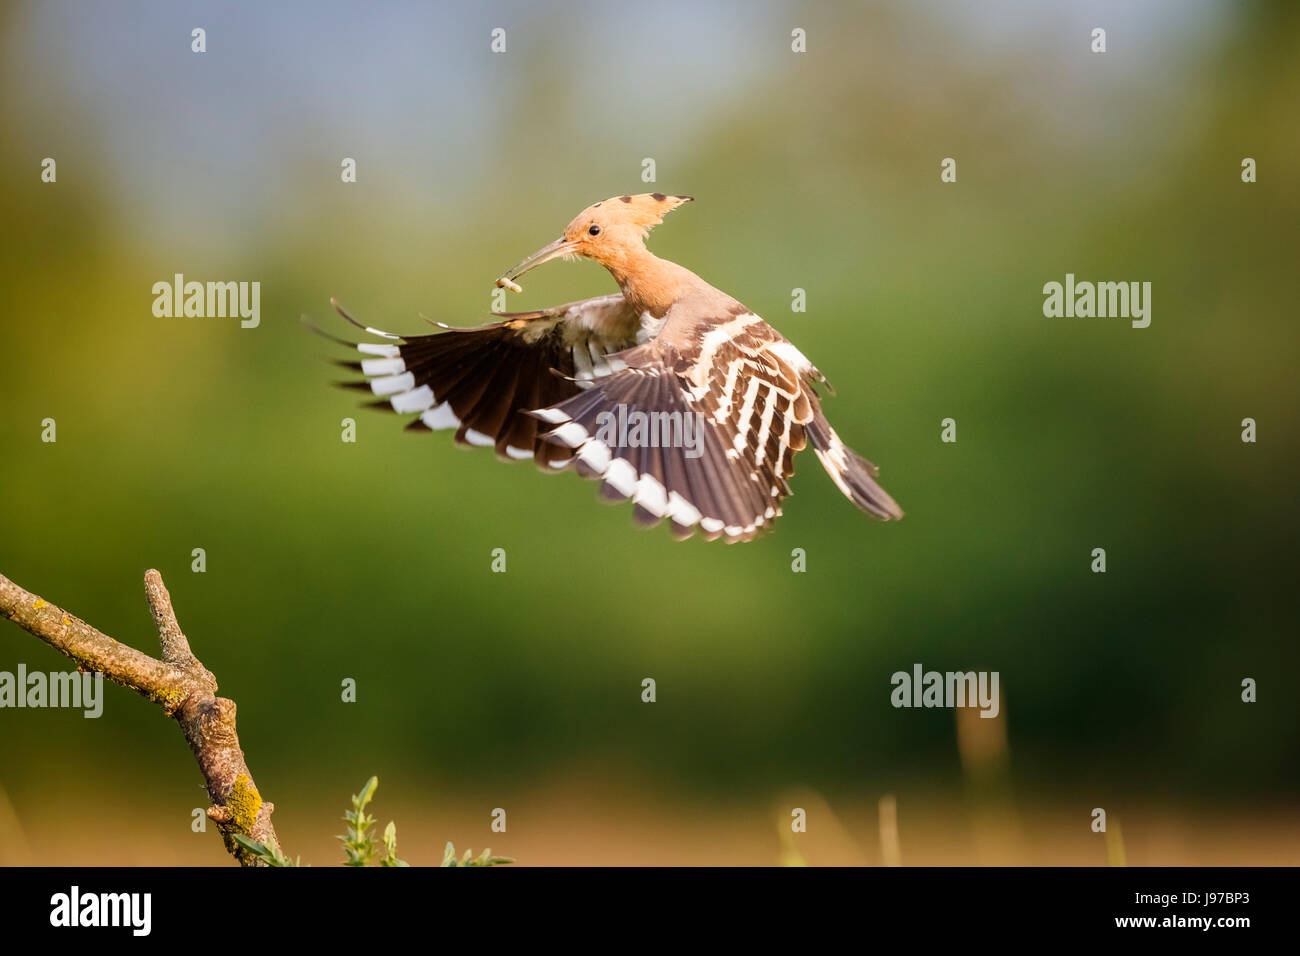 Hoopoe (Upupa epops) in flight carrying an insect in Koros-Maros National Park, Bekes County, Hungary Stock Photo